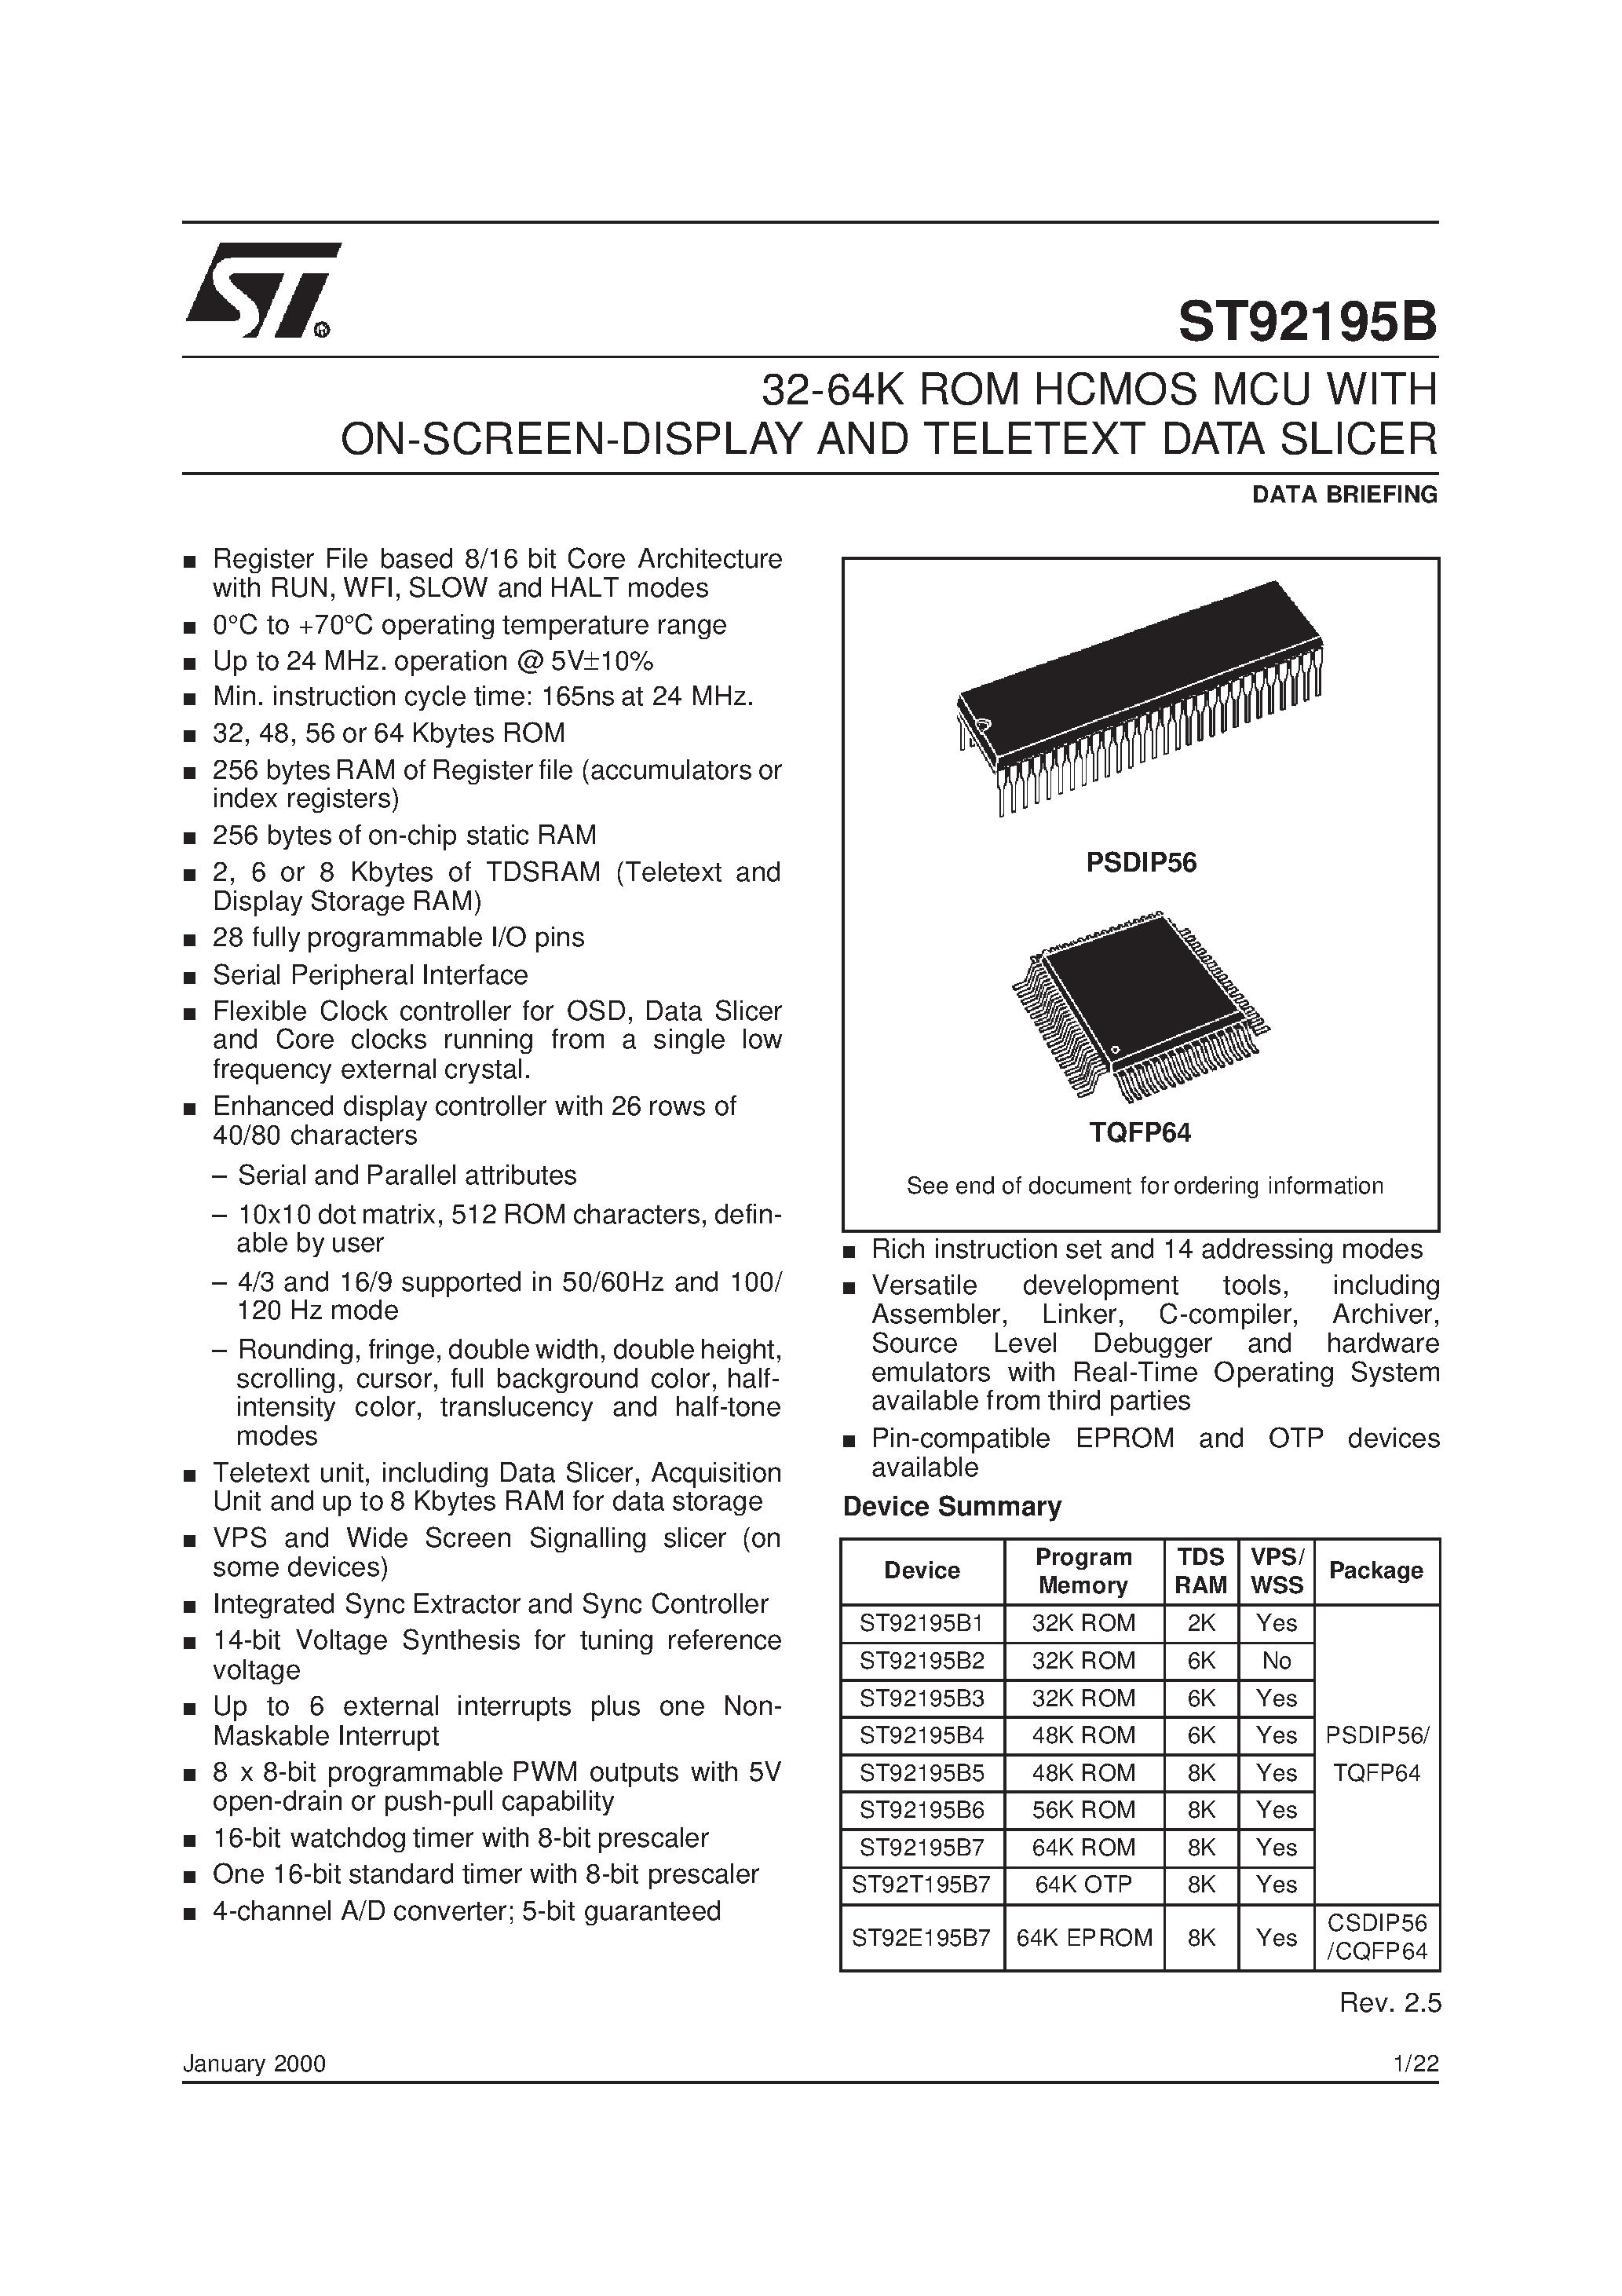 Даташит ST92T195B - 32-64K ROM HCMOS MCU WITH ON-SCREEN-DISPLAY AND TELETEXT DATA SLICER страница 1